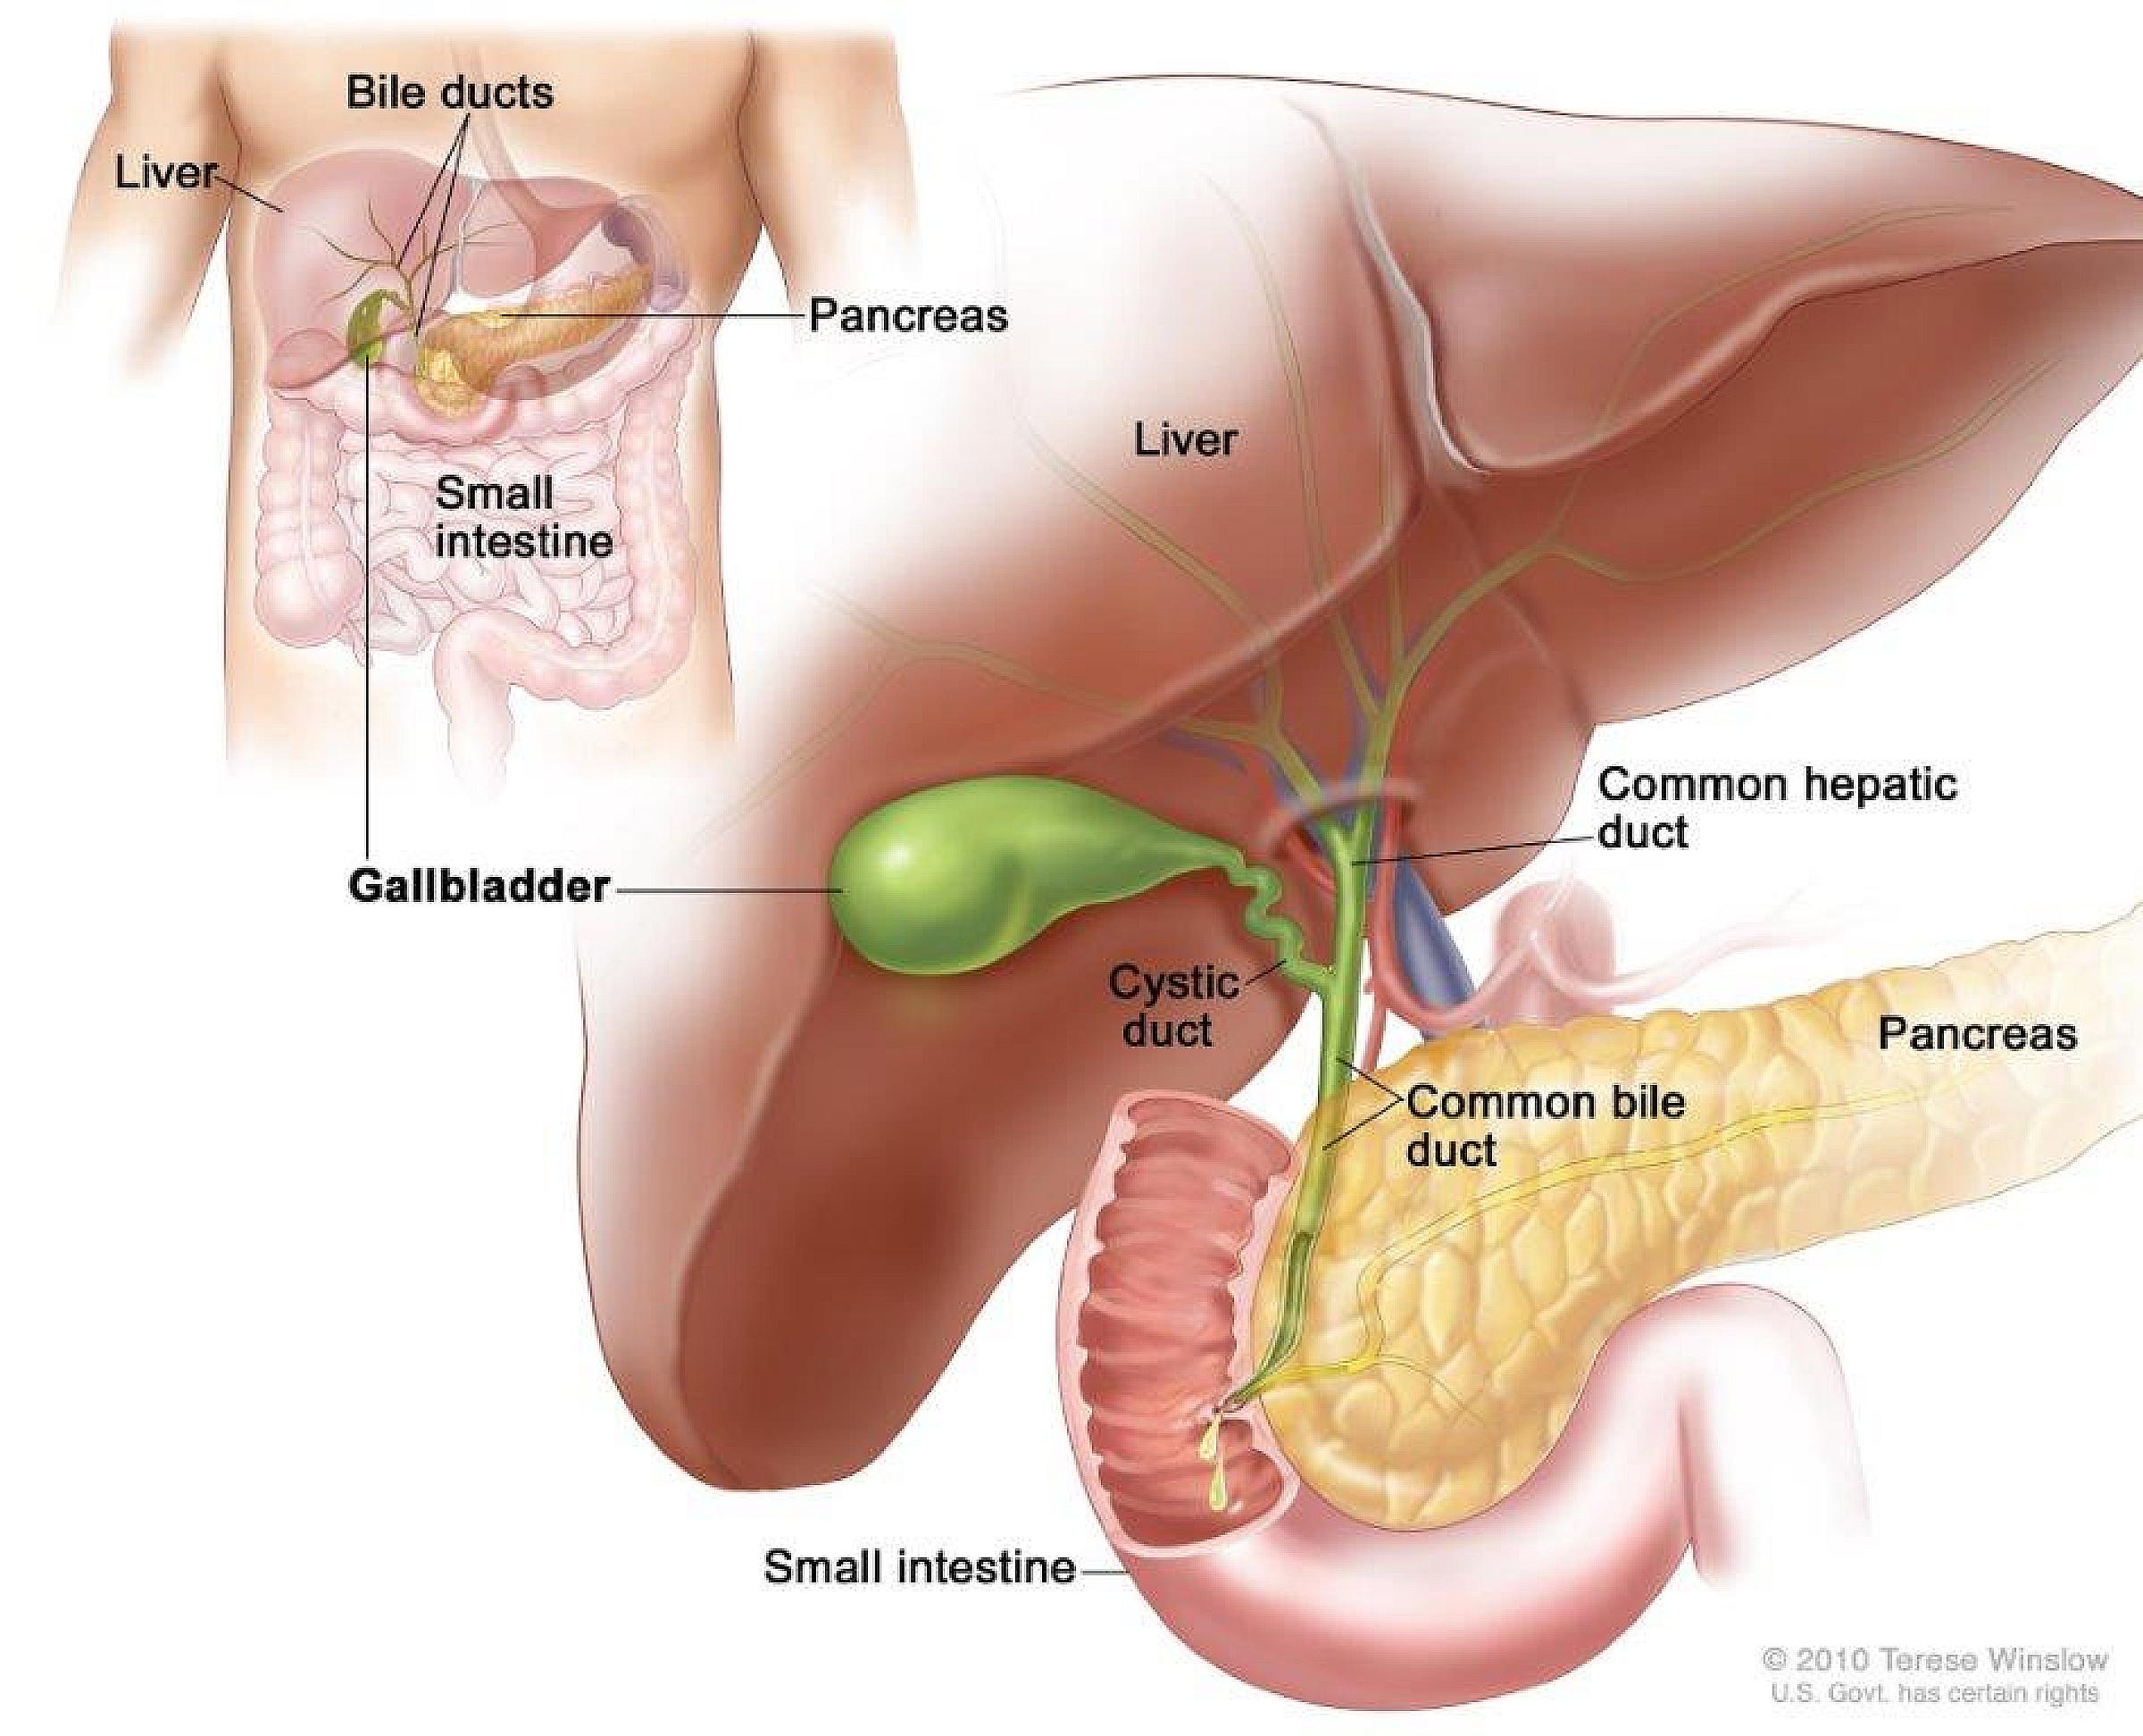 Anatomy of the gallbladder. The gallbladder is just below the liver. Bile is stored in the gallbladder and flows through the cystic duct and the common bile duct into the small intestine when food is being digested.